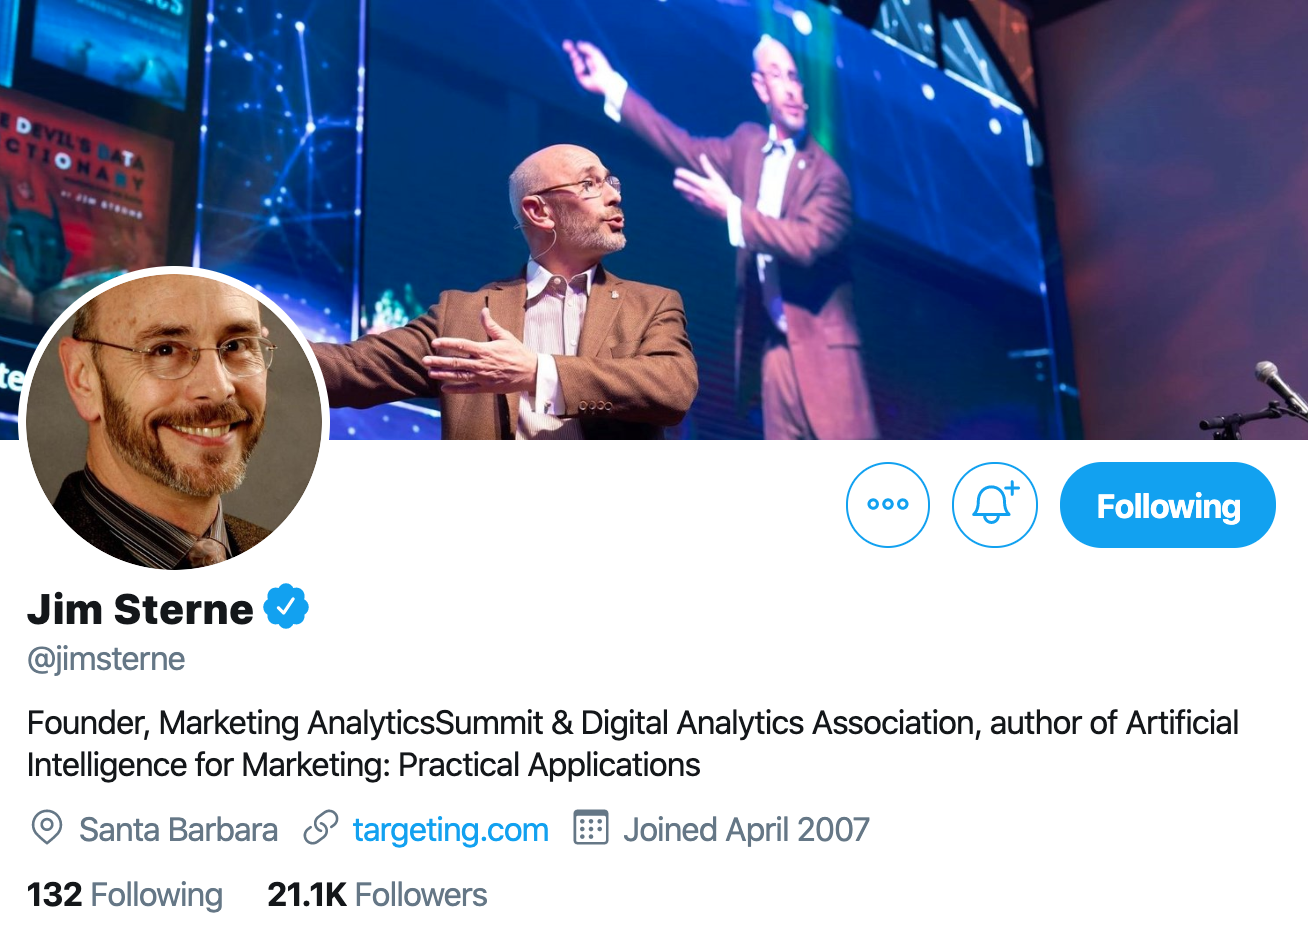 Jim Sterne. Analytics expert to follow on Twitter